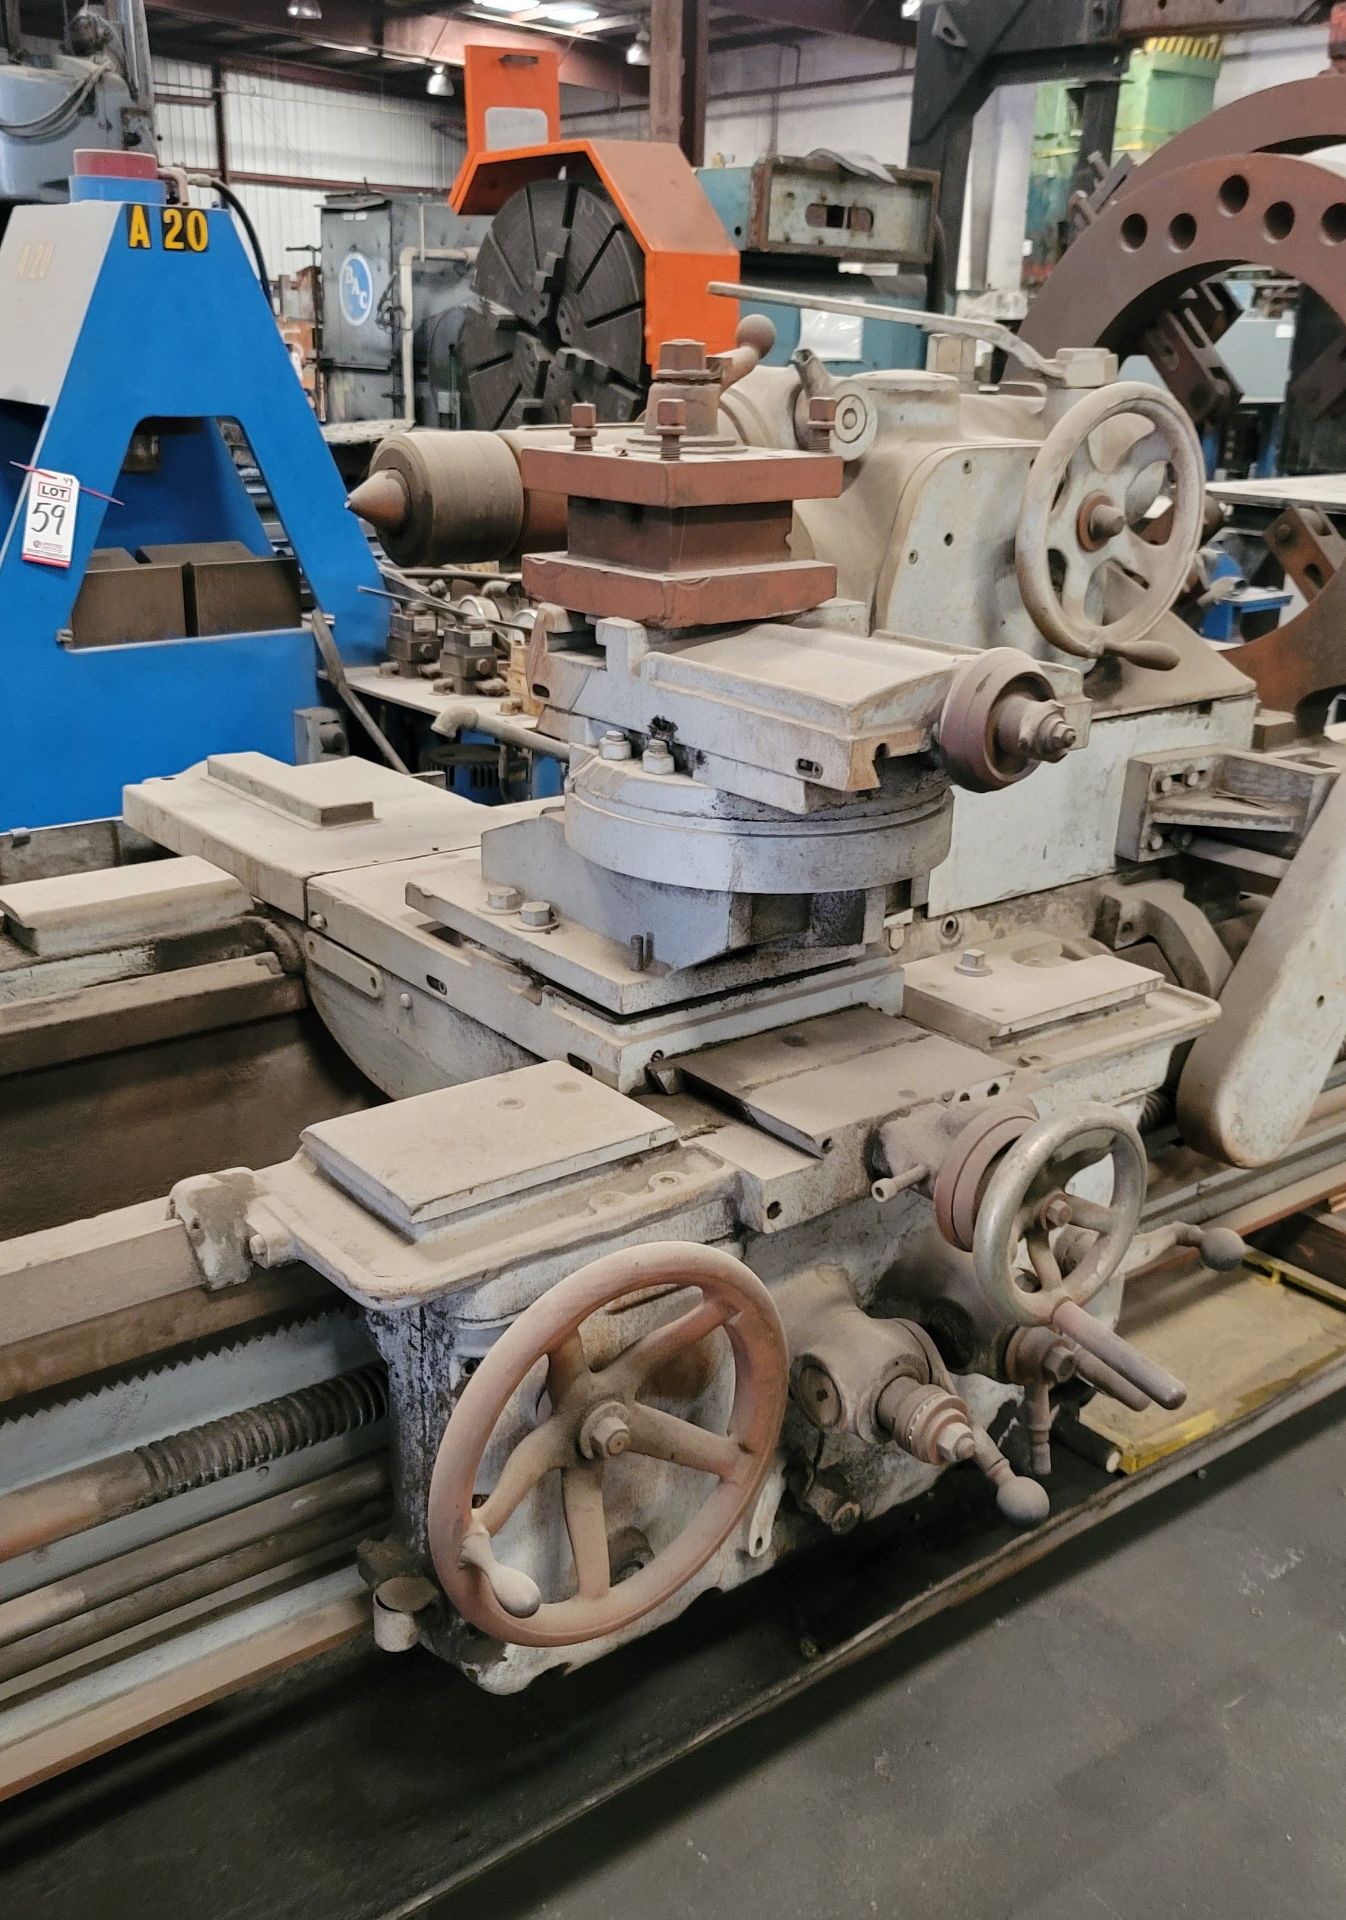 AXELSON A32 ENGINE LATHE, 32" X 168", 30" 4-JAW CHUCK, TAILSTOCK, (2) STEADY RESTS - Image 8 of 9